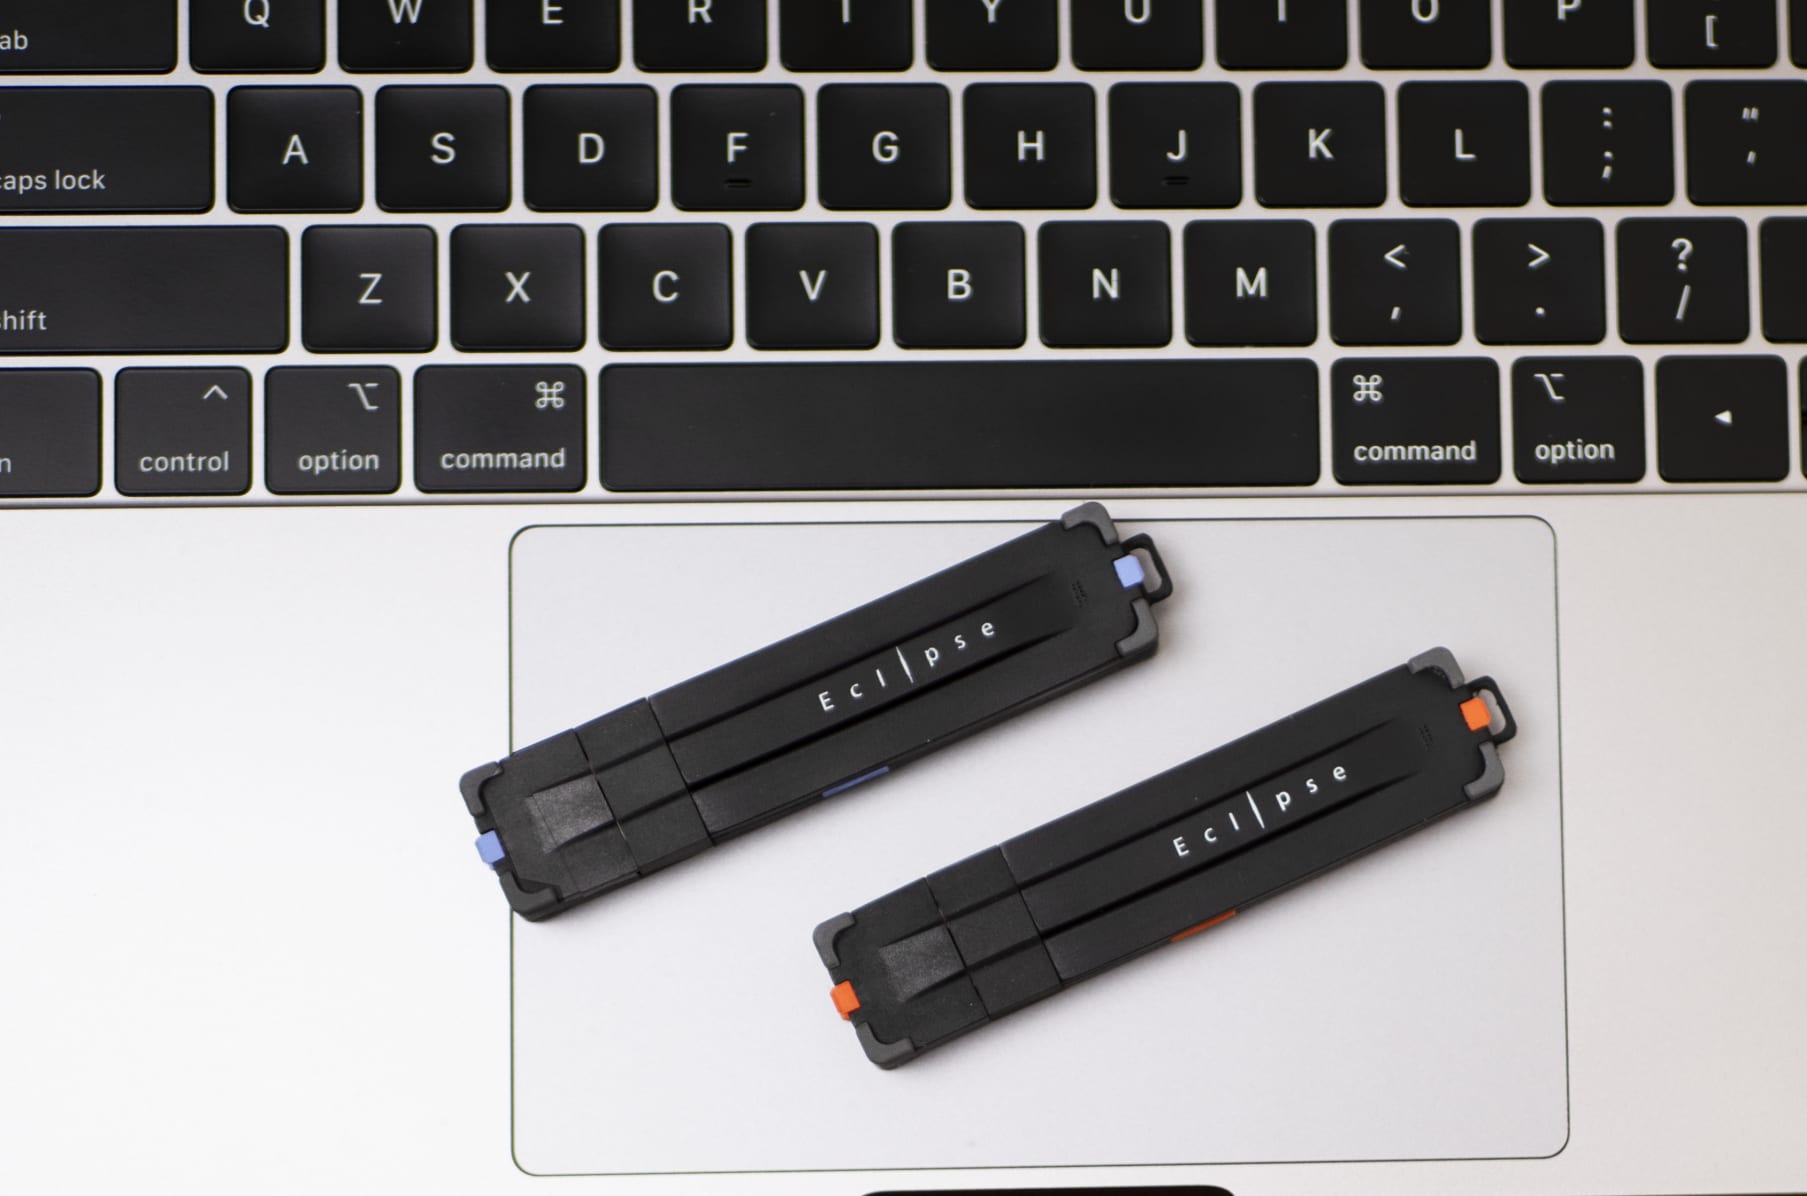 ECLLPSE - Unbreakable High-Speed Portable SSD | Indiegogo